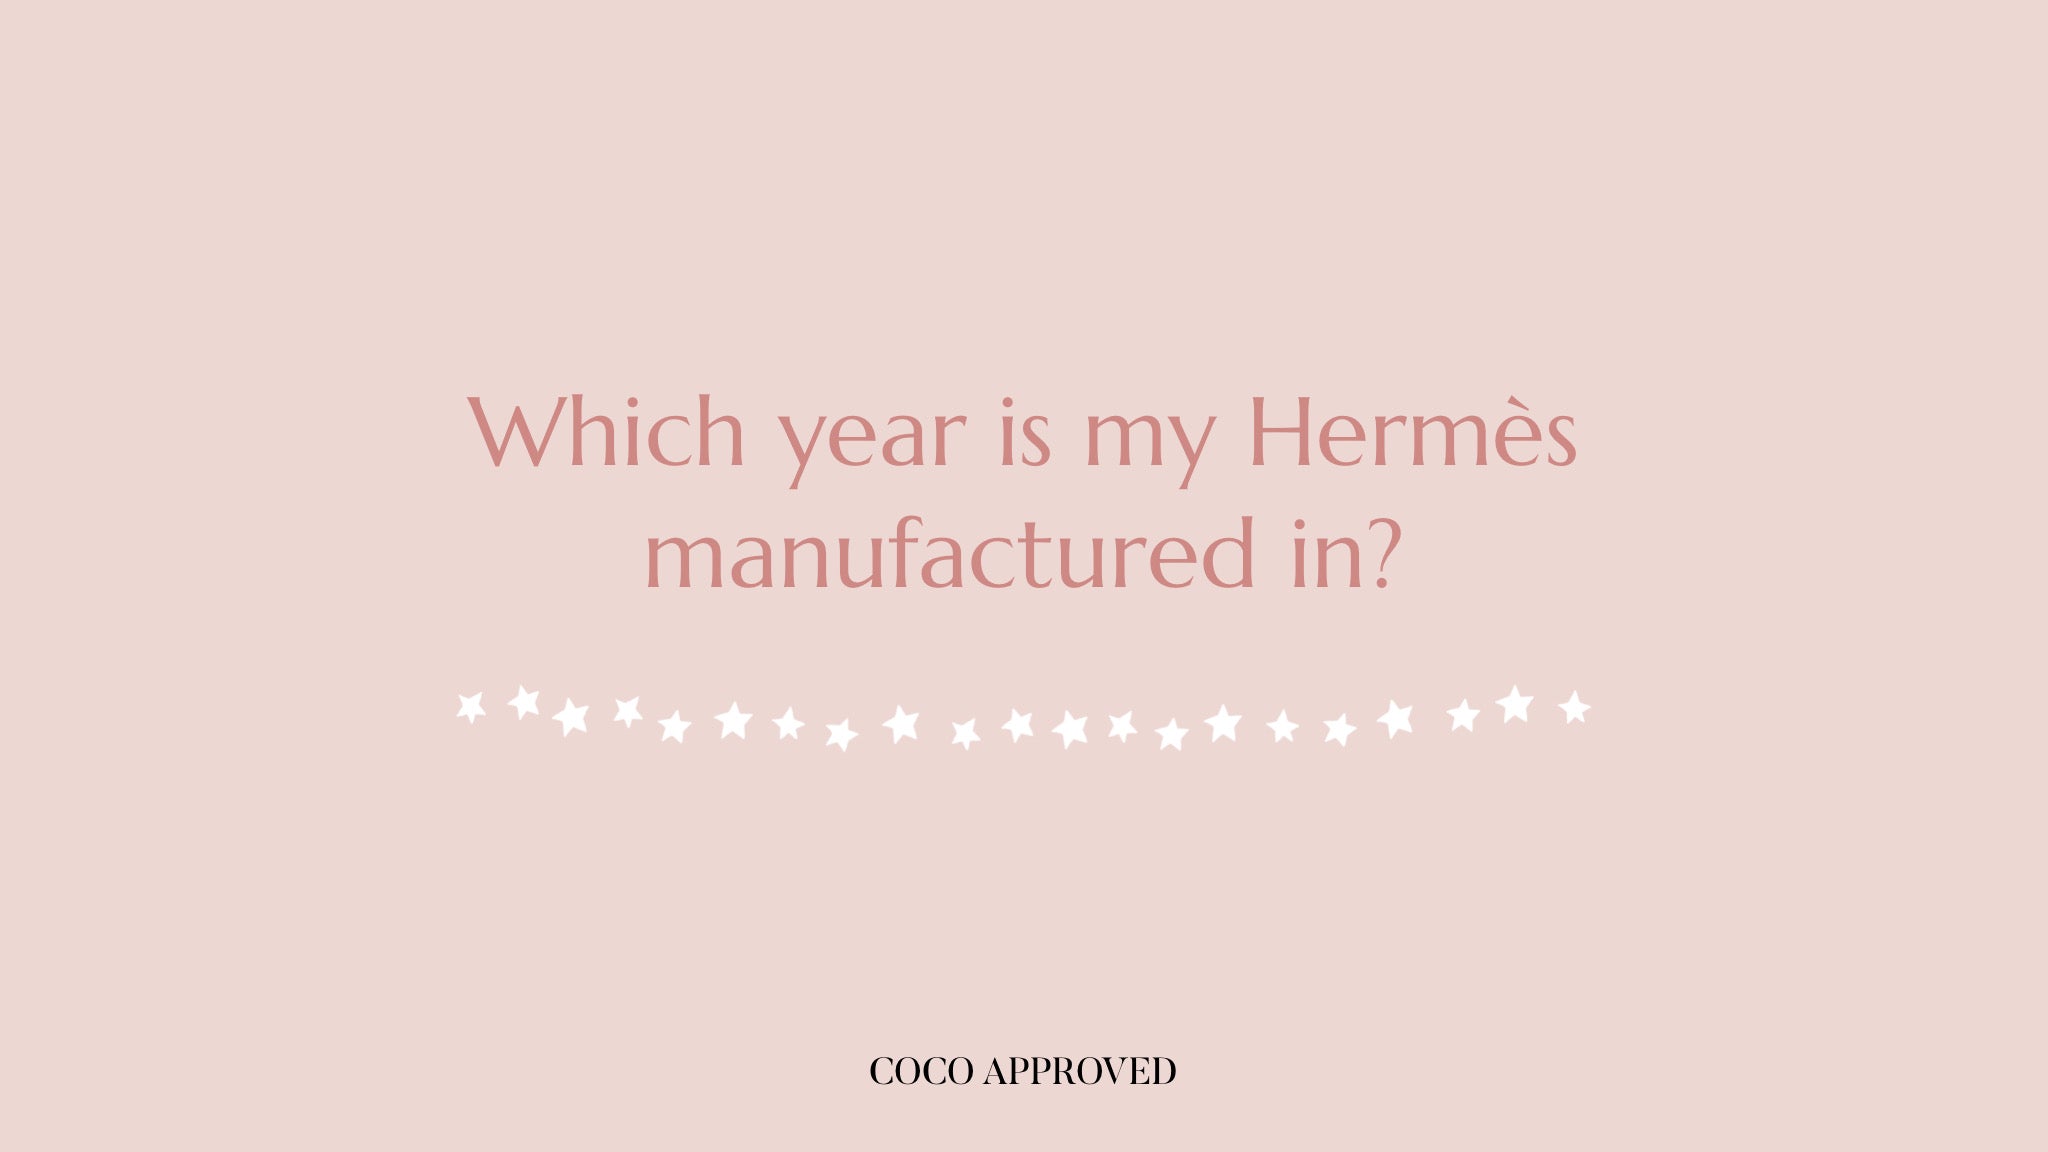 How To Authenticate Hermes Bags by Reading the Date Stamp